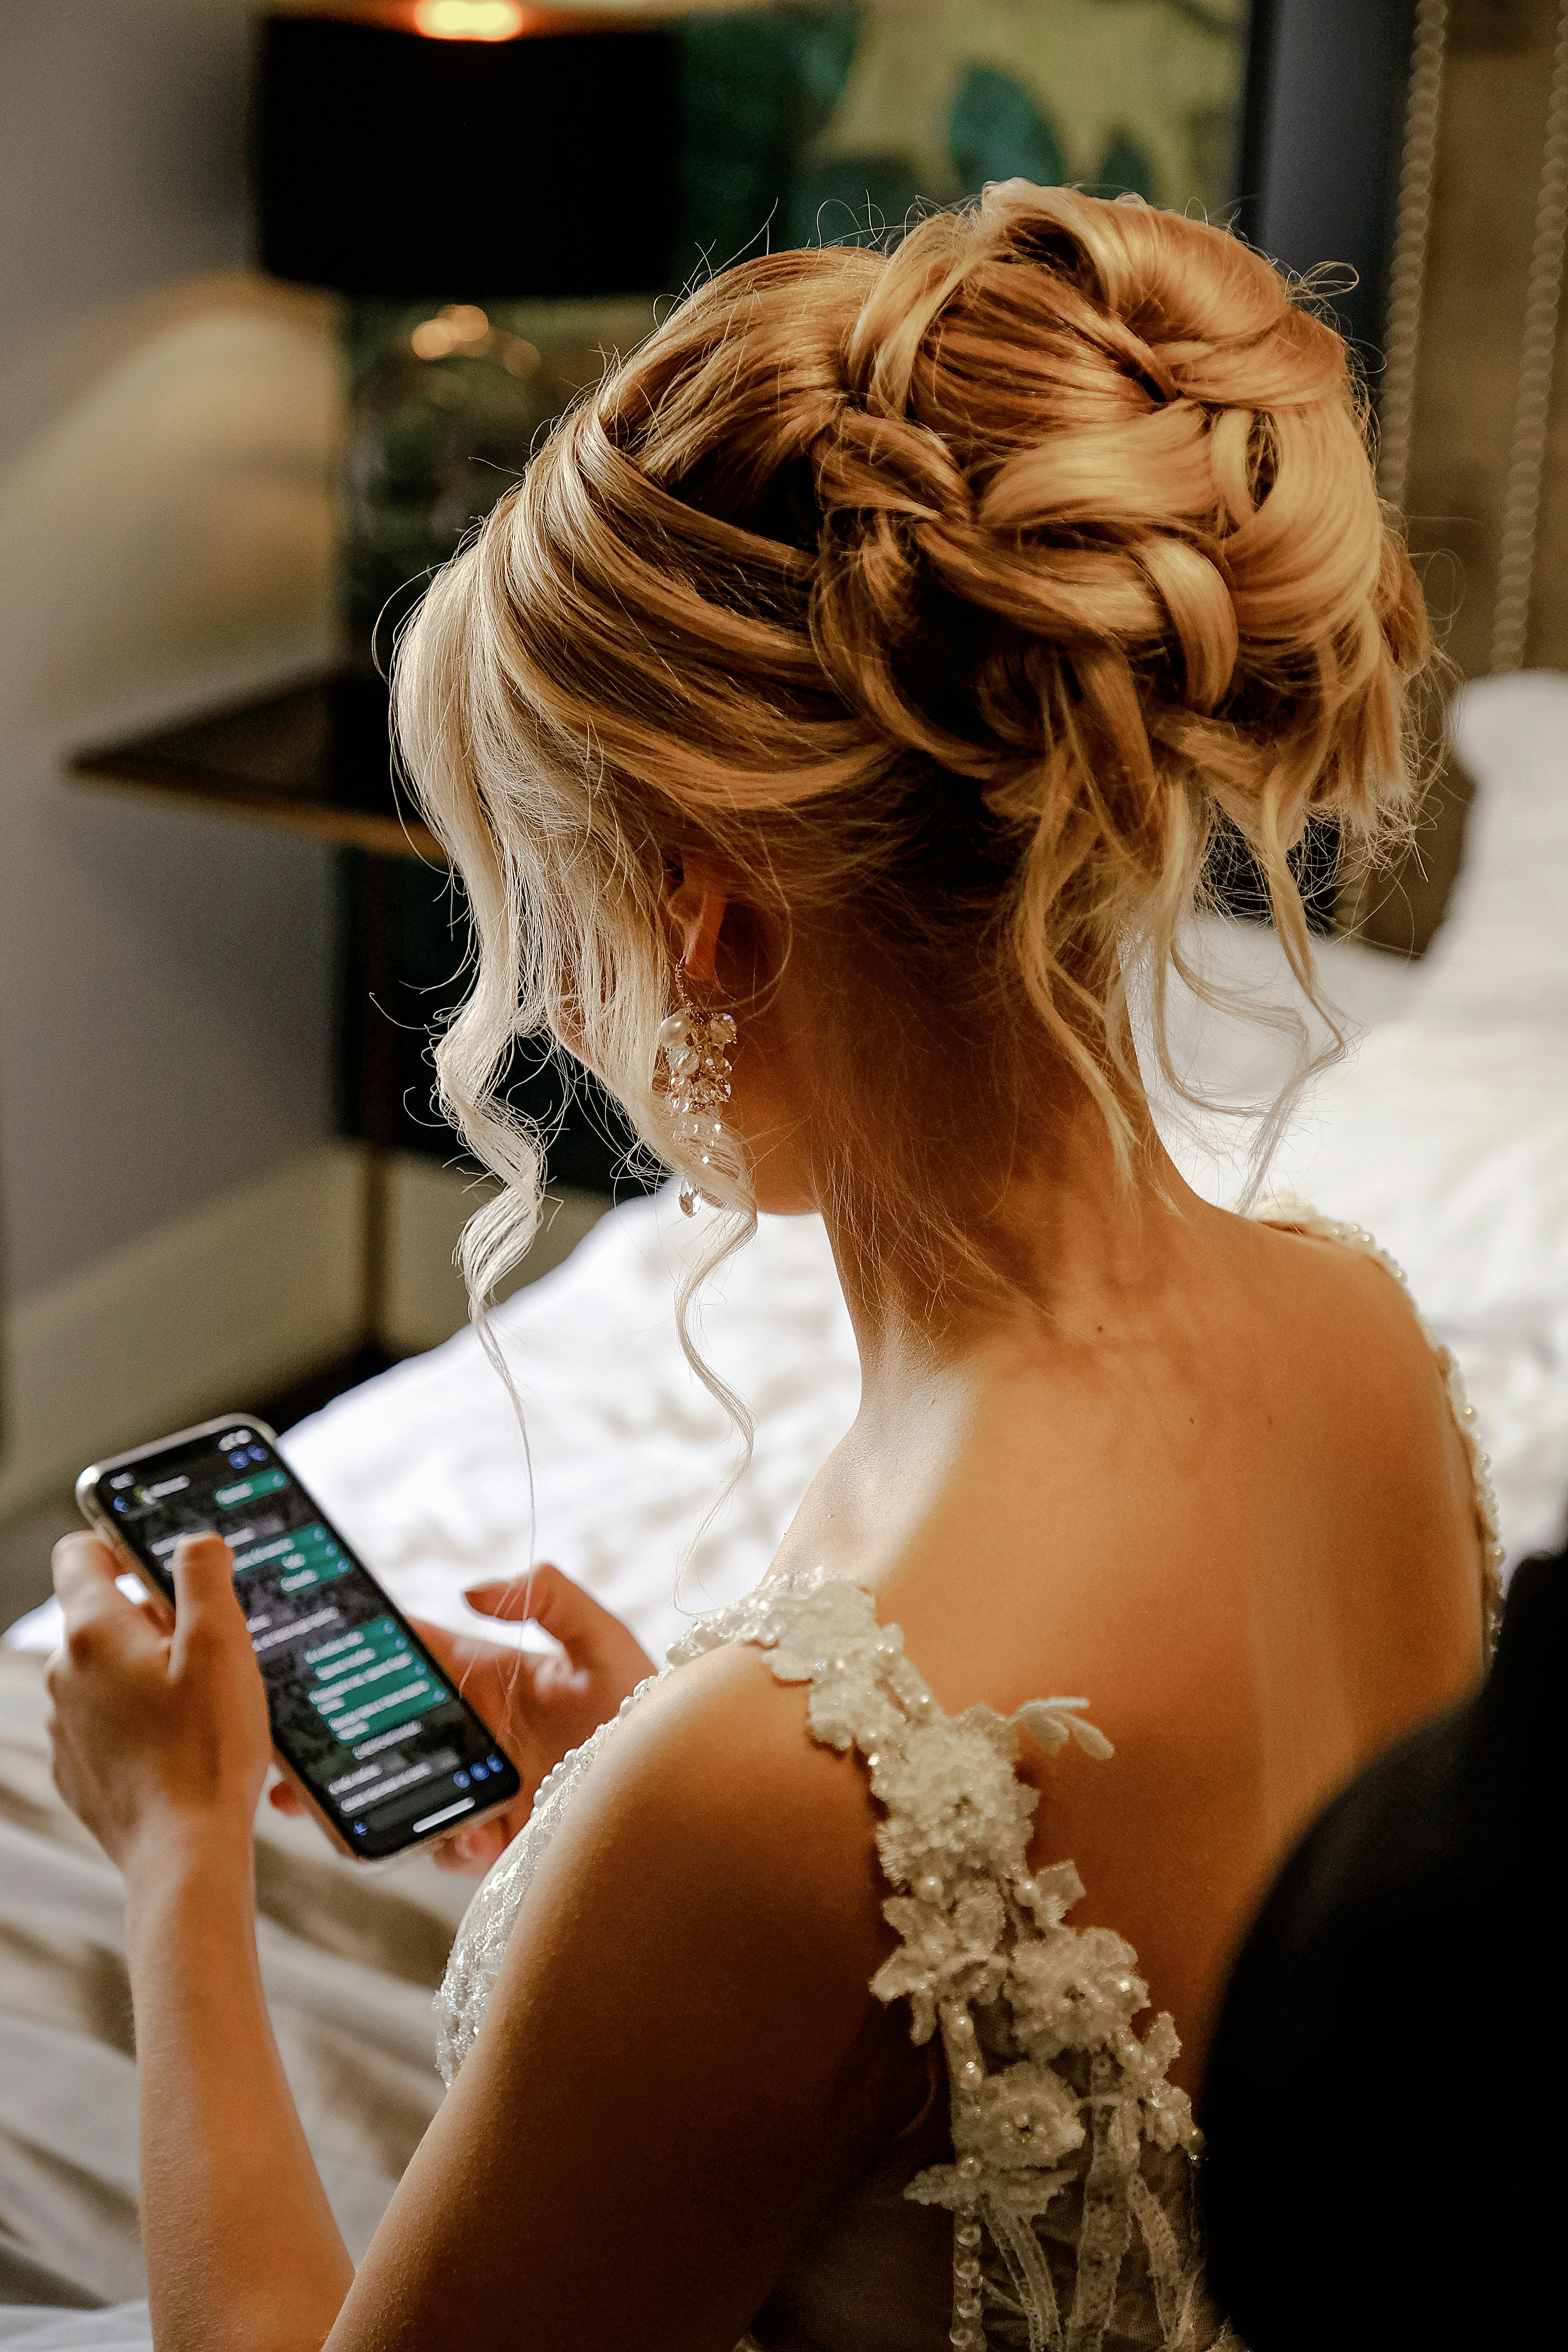 A bride using her phone | Source: Pexels